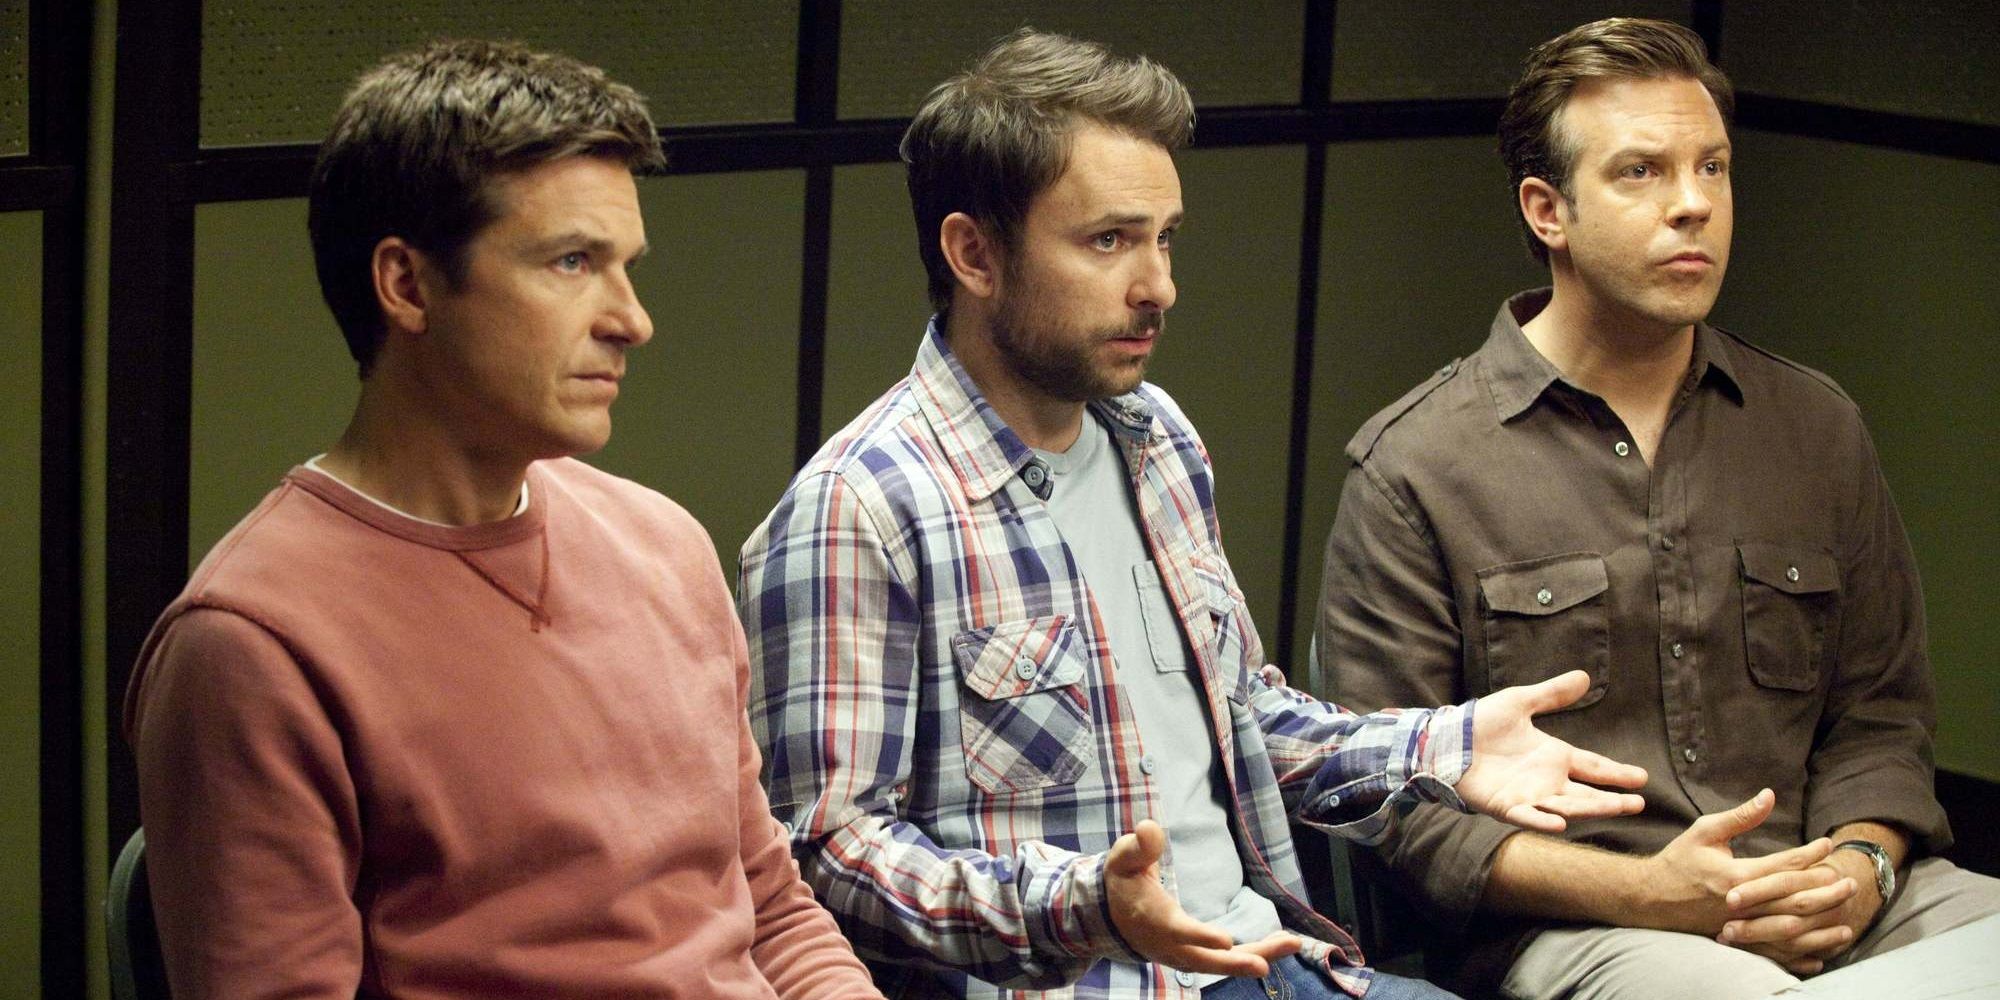 Jason Bateman, Charlie Day, and Jason Sudeikis in an interrogation room in Horrible Bosses